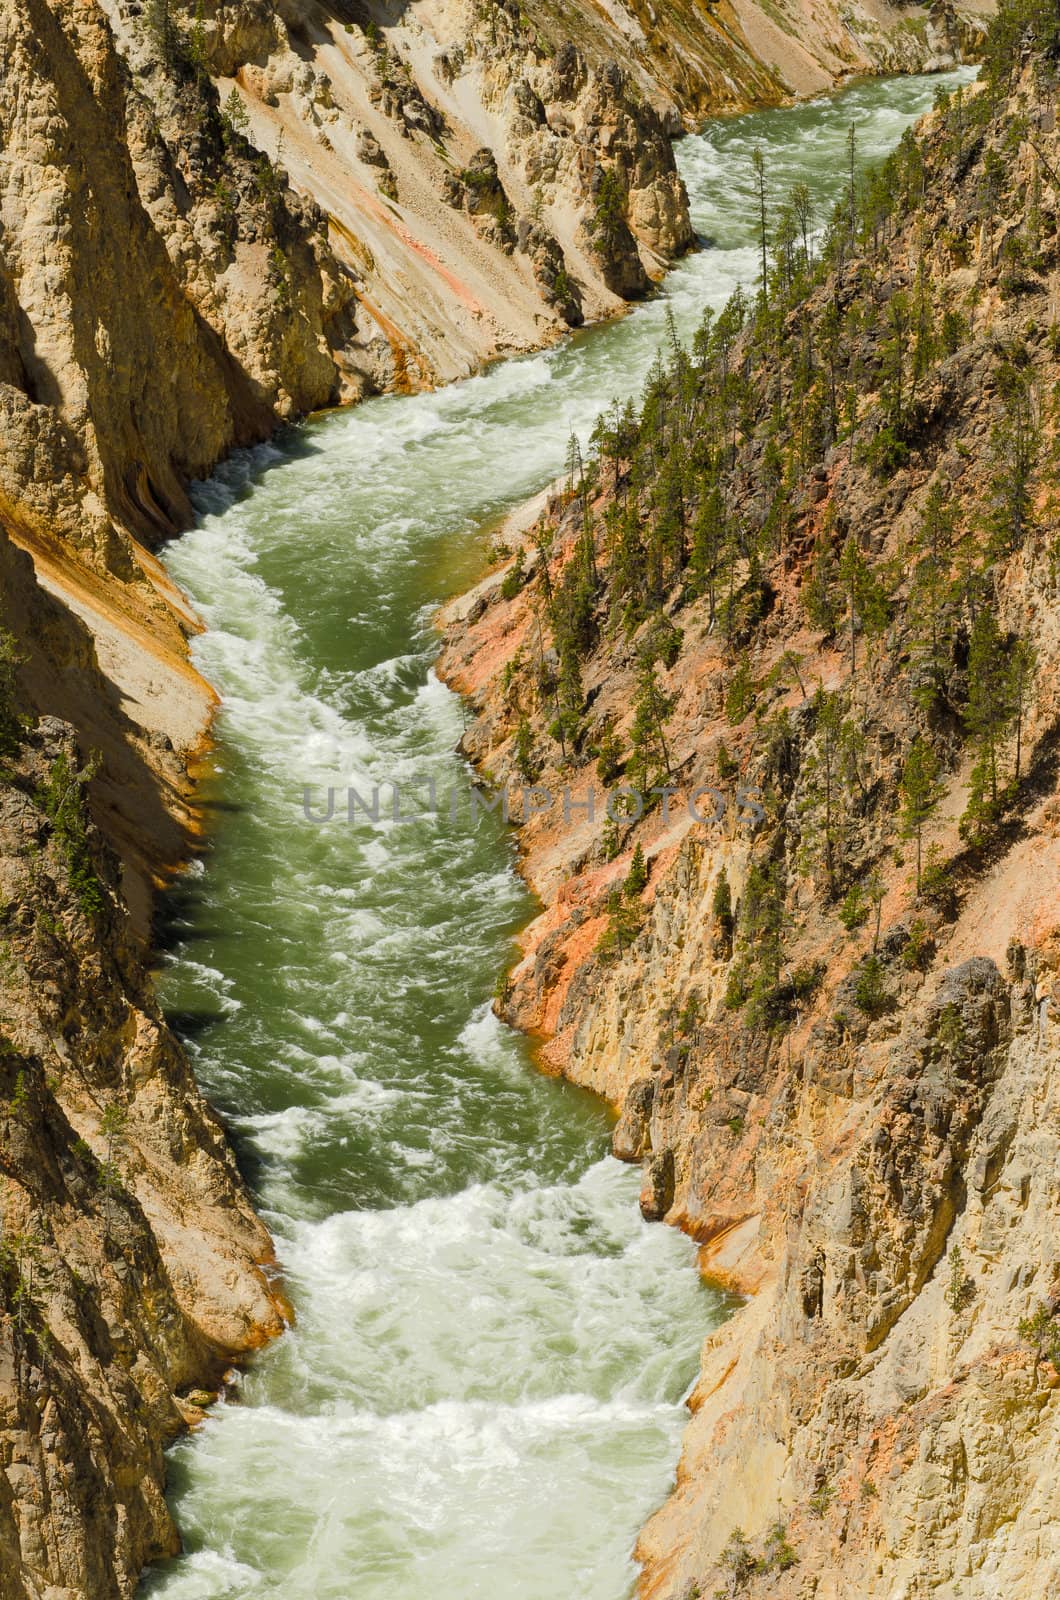 The Grand Canyon of the Yellowstone River, Yellowstone National Park, Park County, Wyoming, USA by CharlesBolin